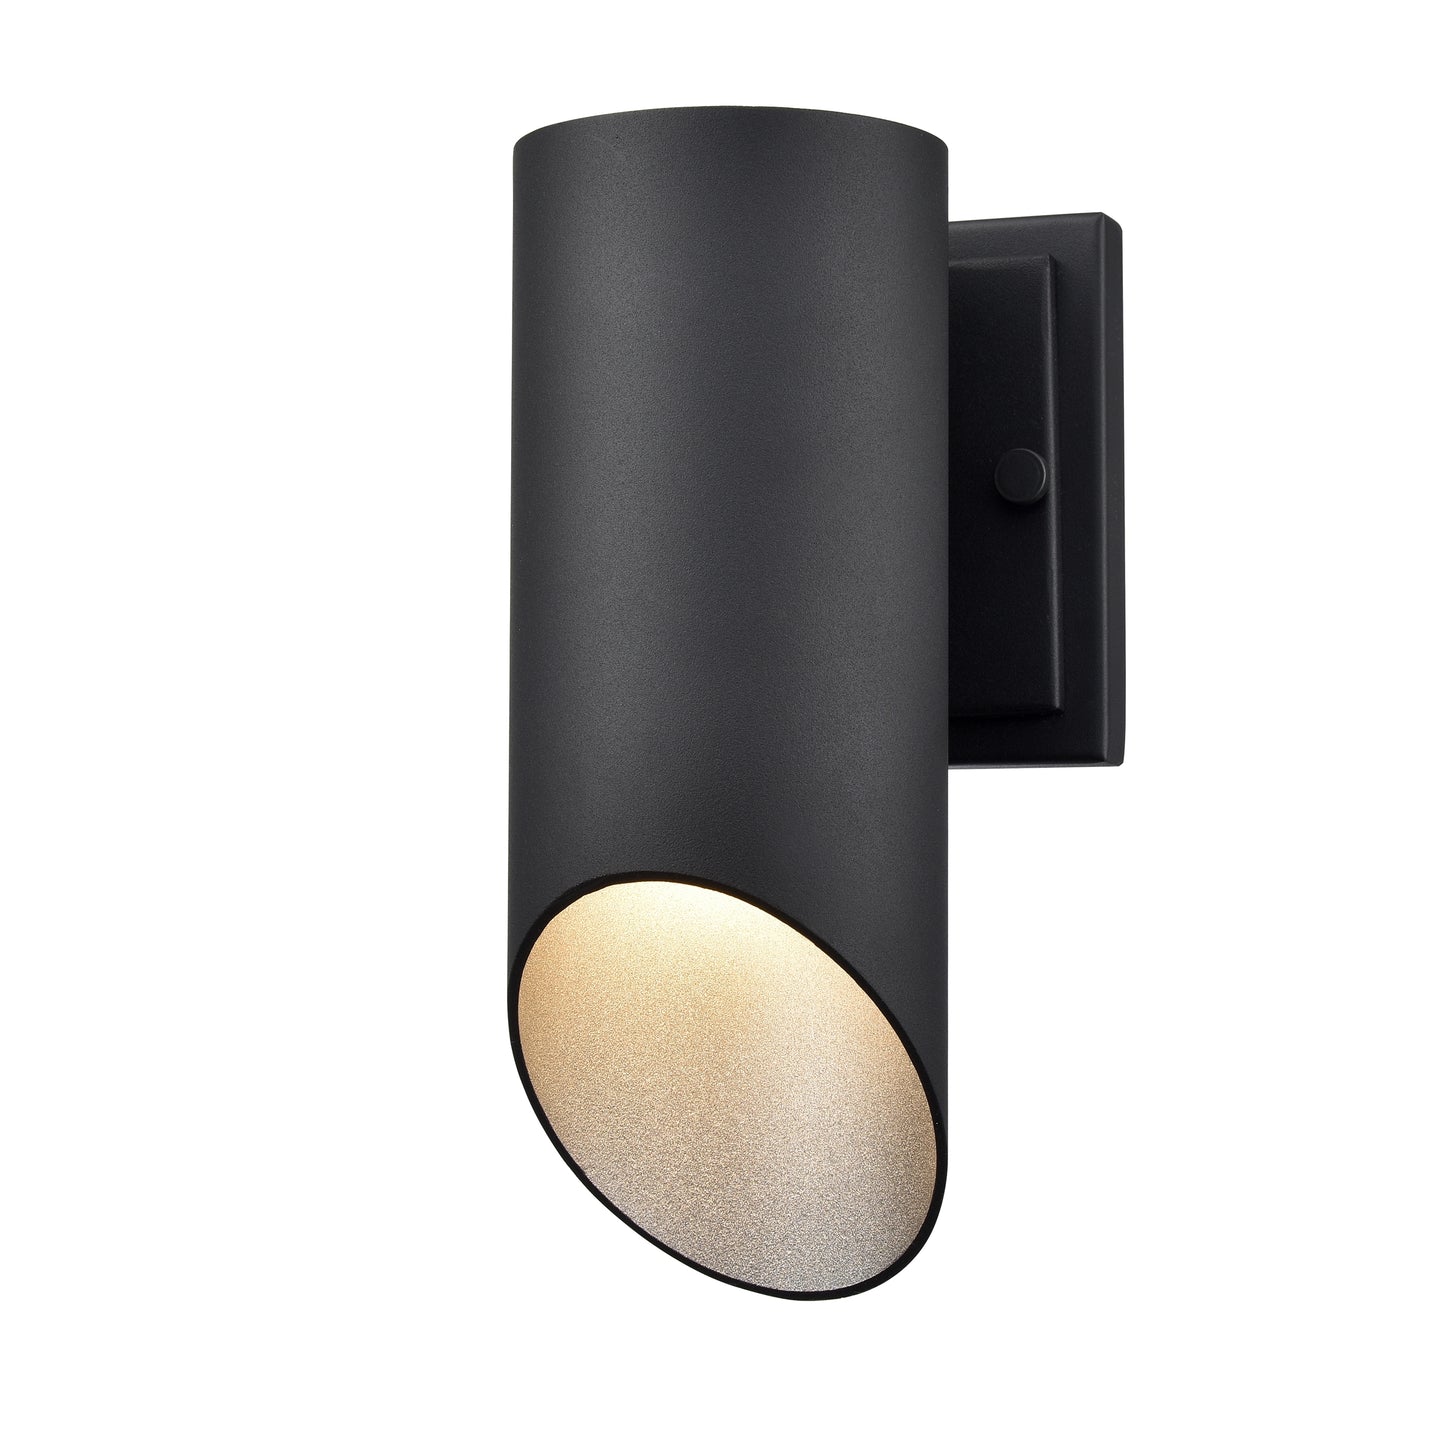 Brecon Outdoor 1-Light Sconce